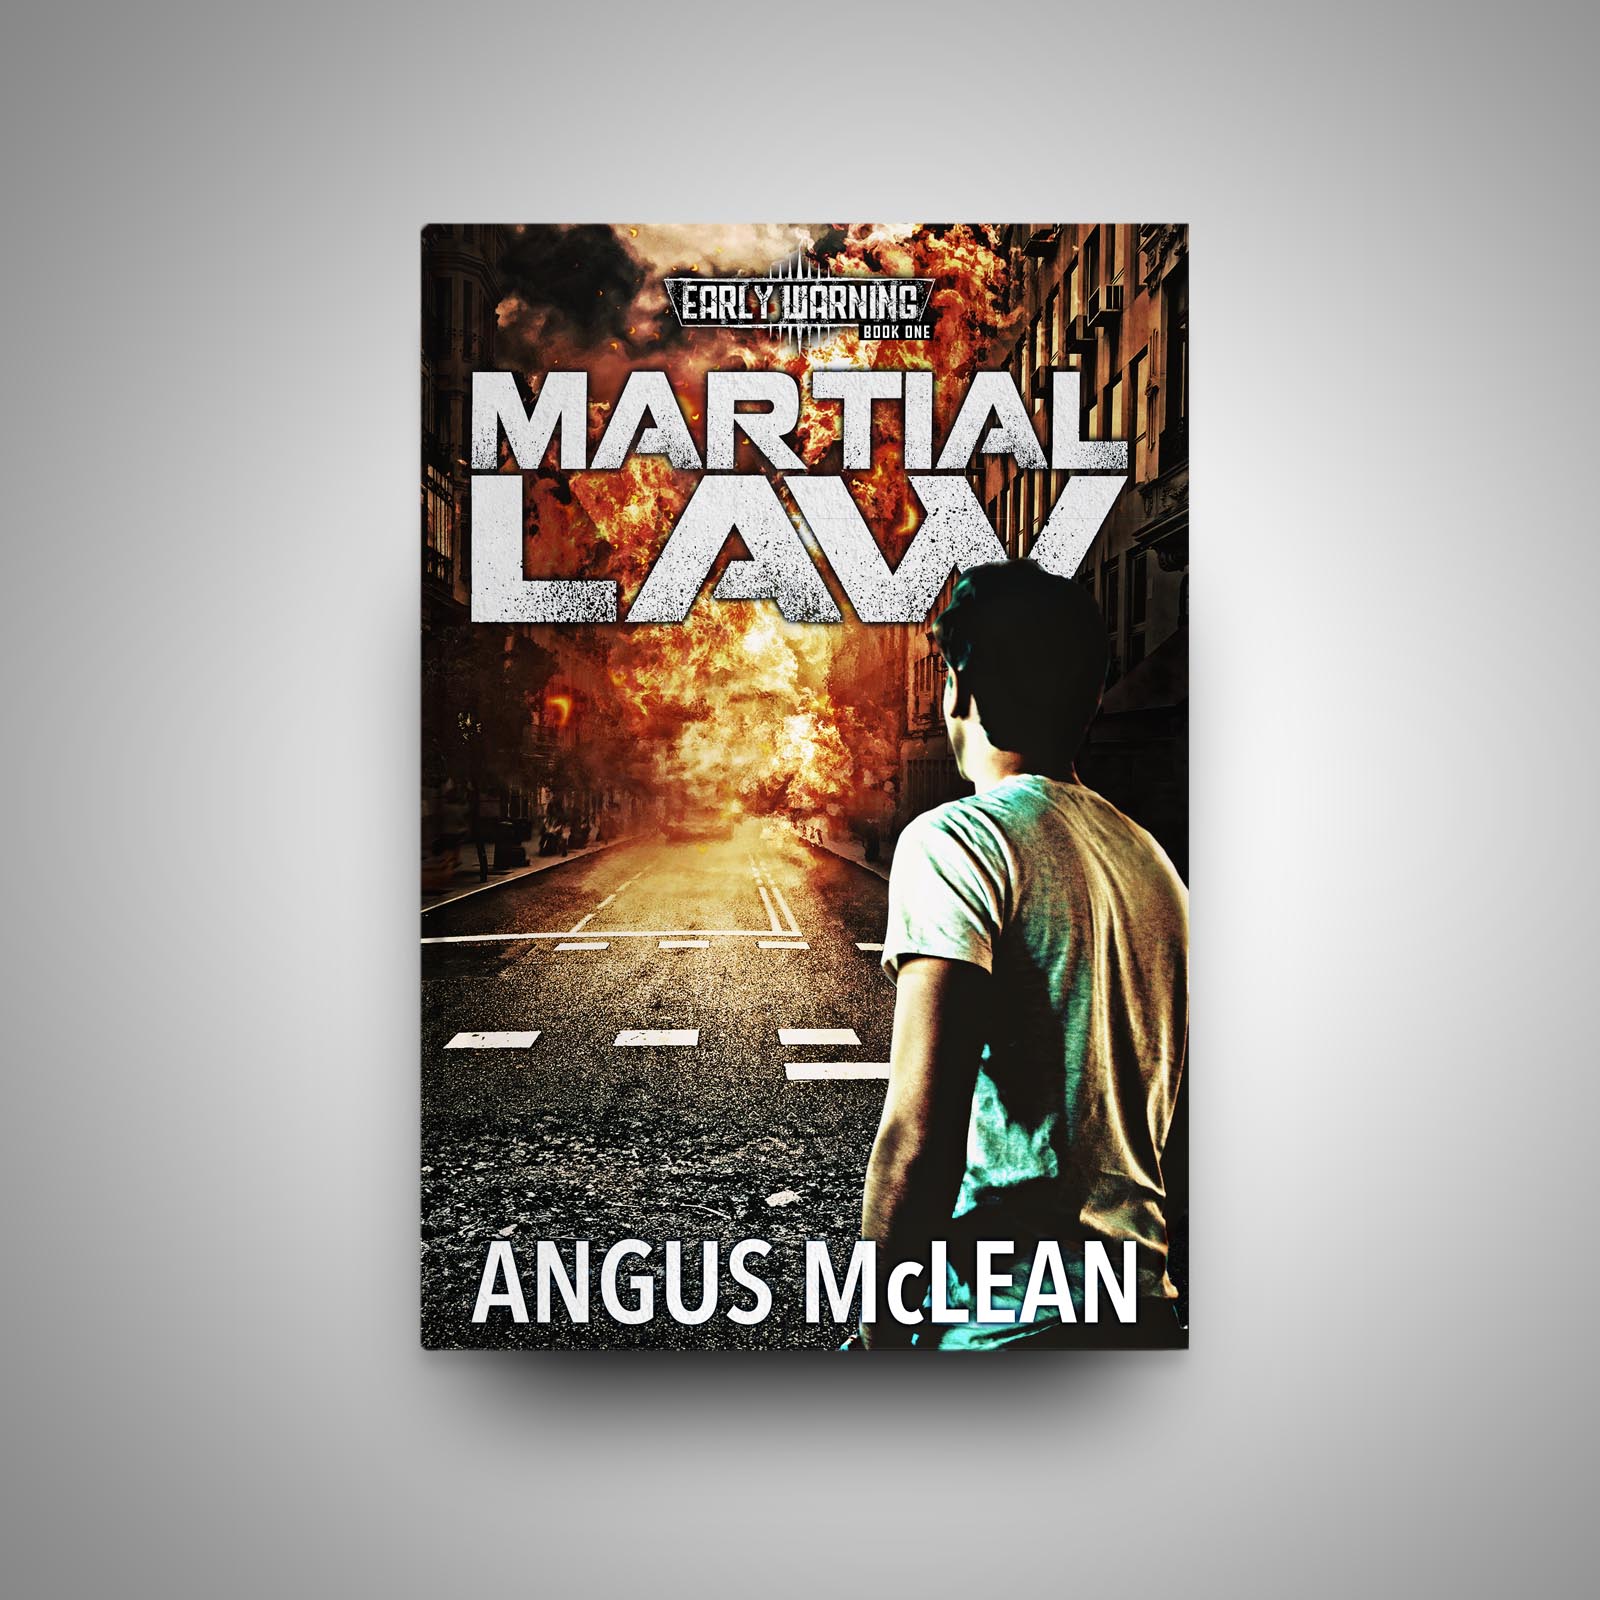 Angus McLean ebook download kindle Early Warning Martial Law post-apocalypse ebooks